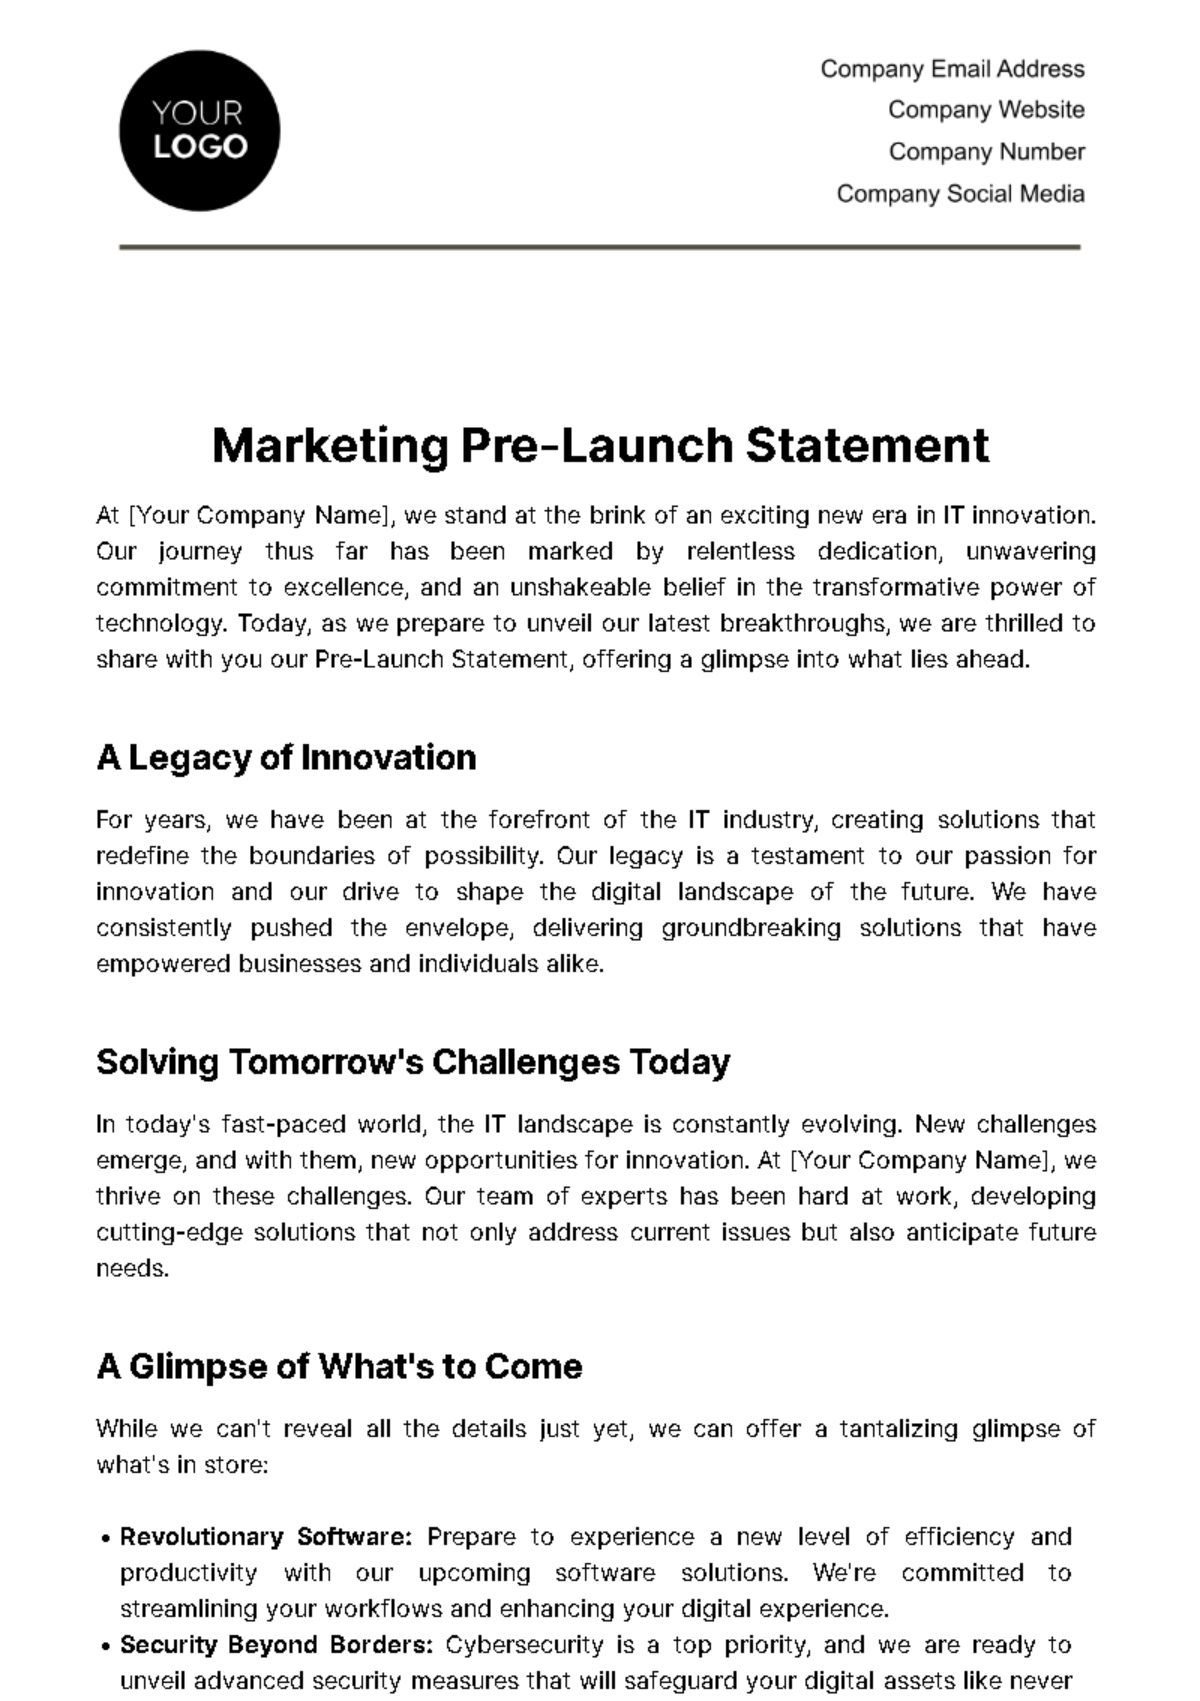 Free  Marketing Pre-Launch Statement Template